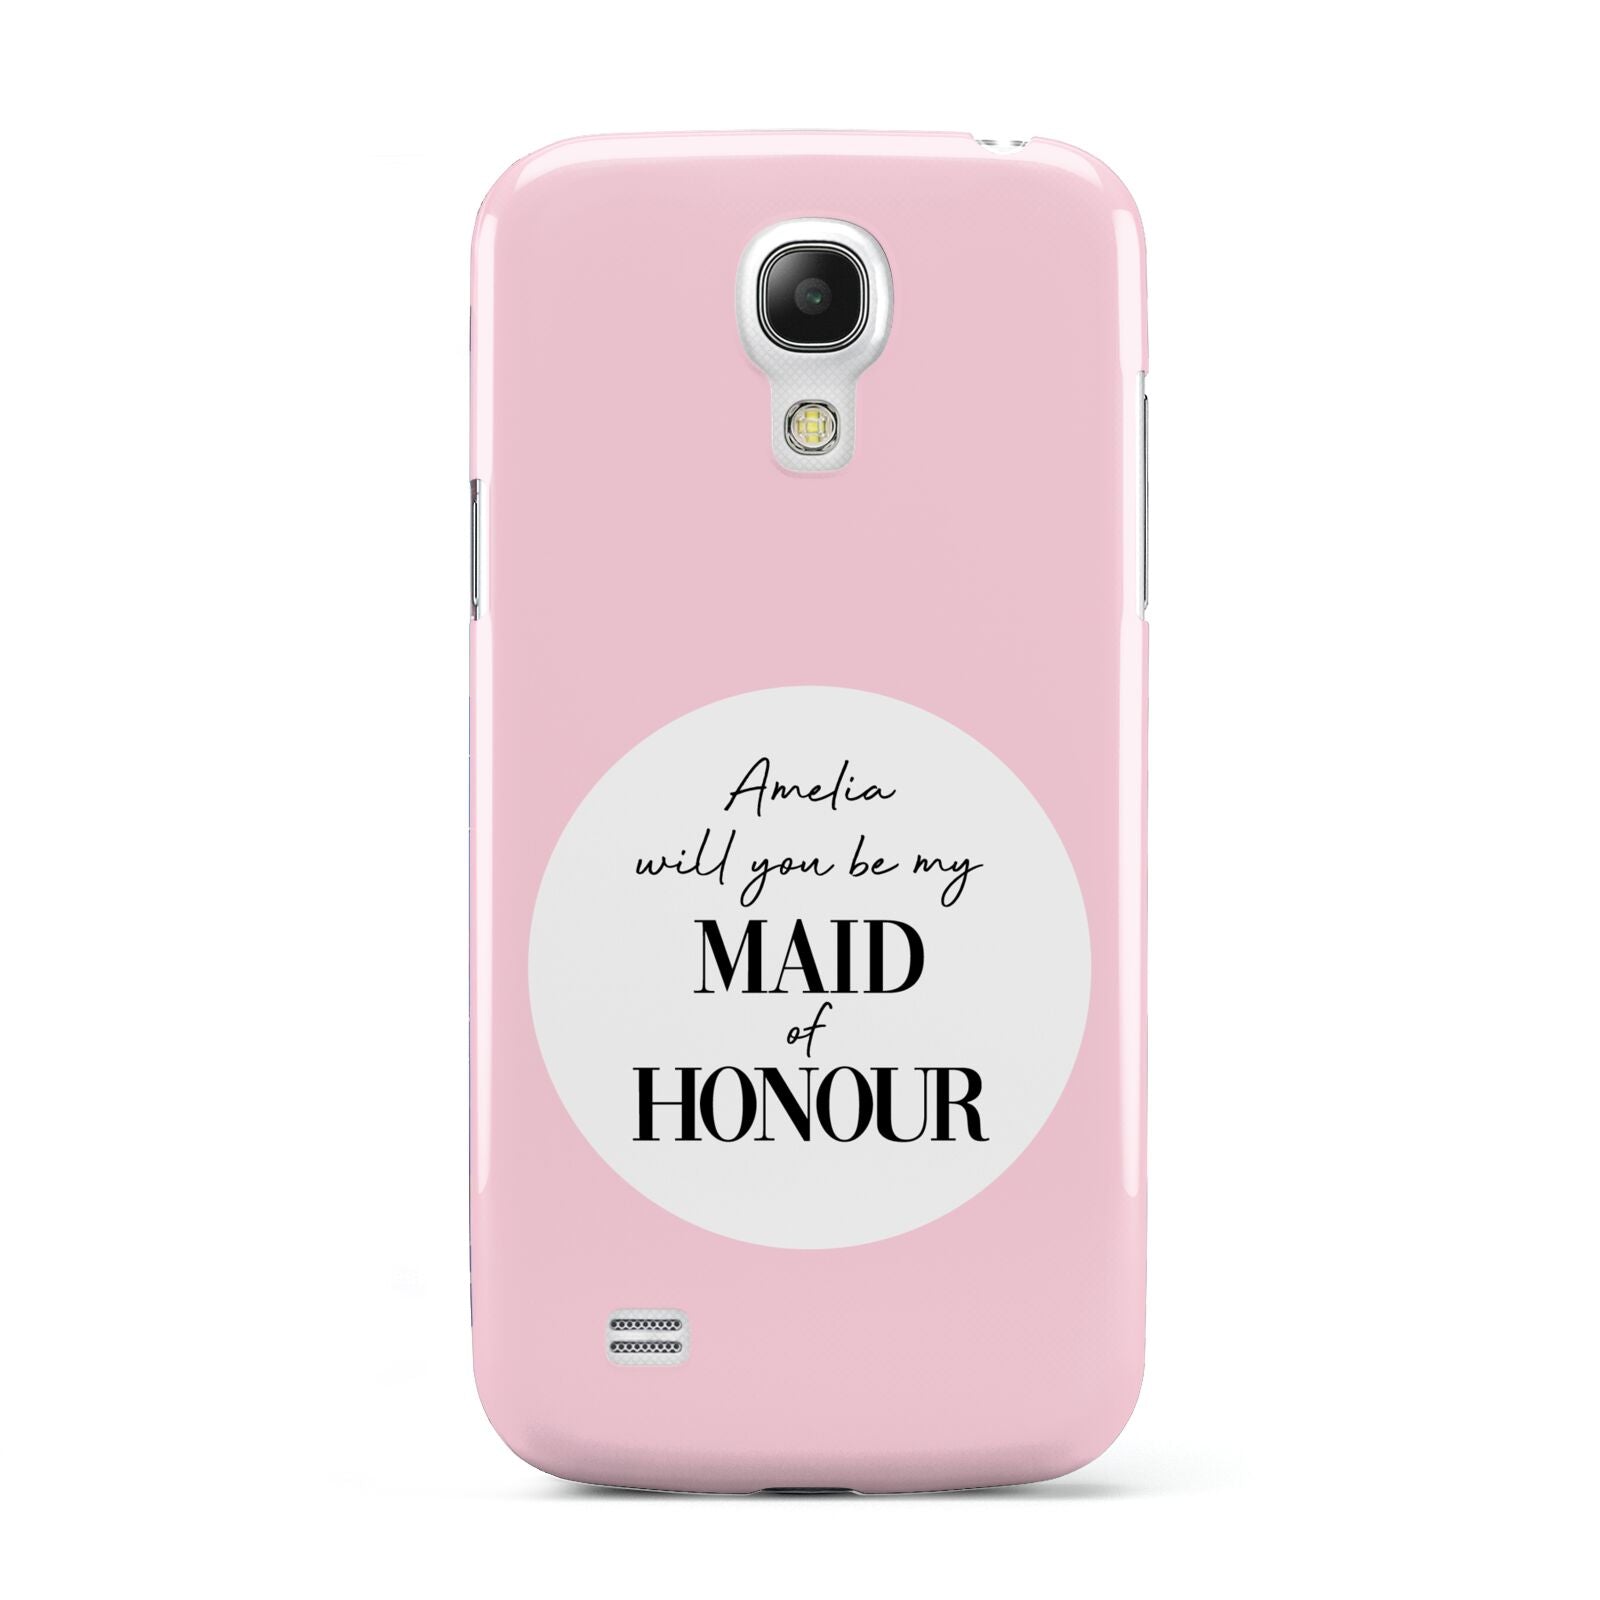 Will You Be My Maid Of Honour Samsung Galaxy S4 Mini Case